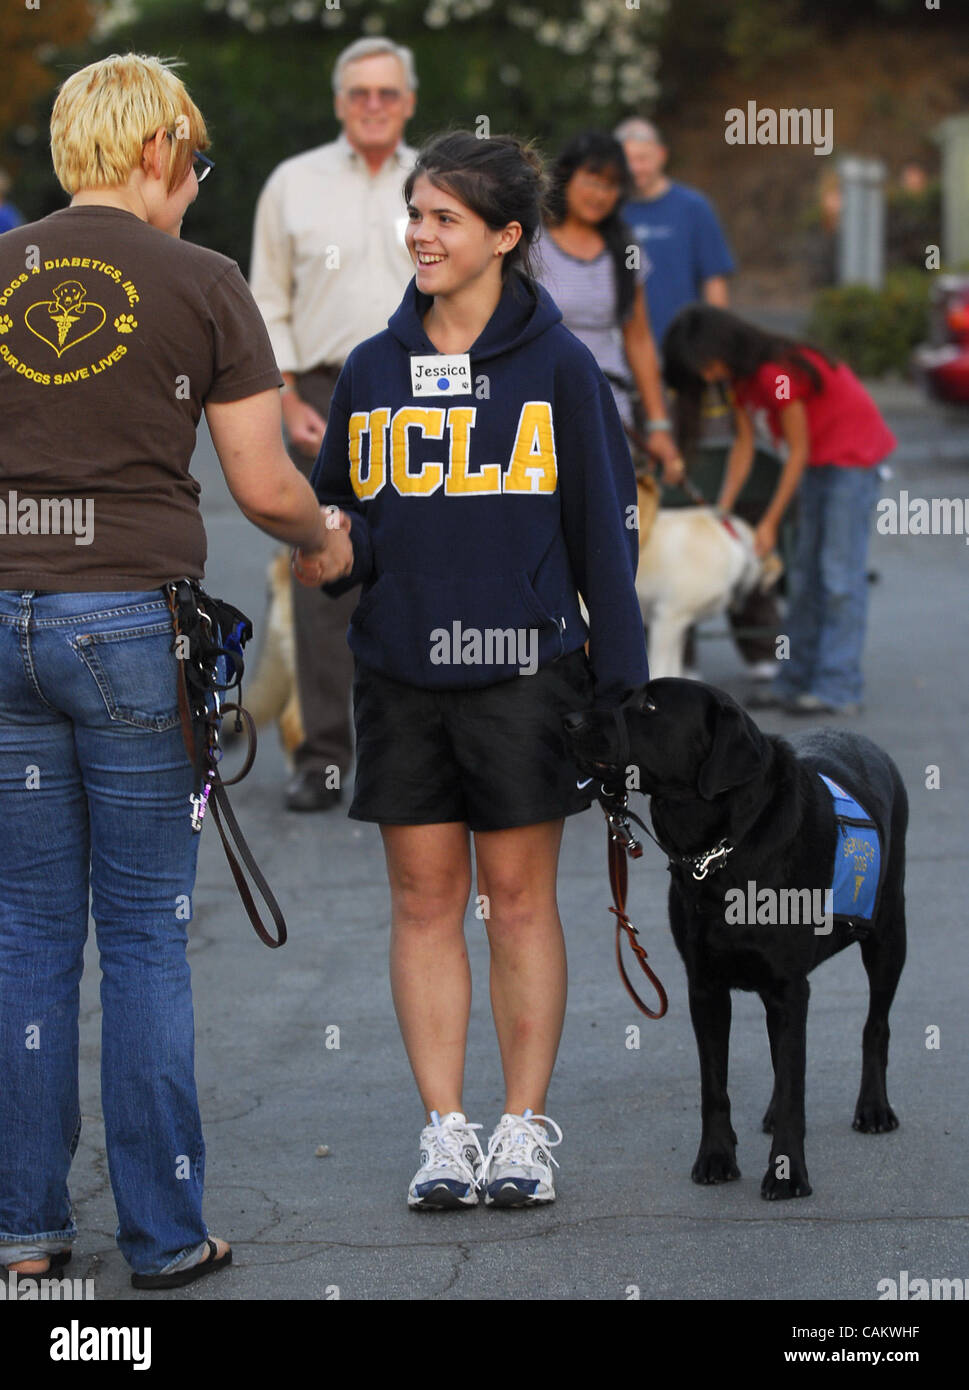 Jessica Weiss shakes hands with volunteer Breanne Harris (left) while walking Carlisle during a training drill at Dogs 4 Diabetics in Concord, Calif. on Tuesday, September 11, 2007.  (Dean Coppola/Contra Costa Times) Stock Photo